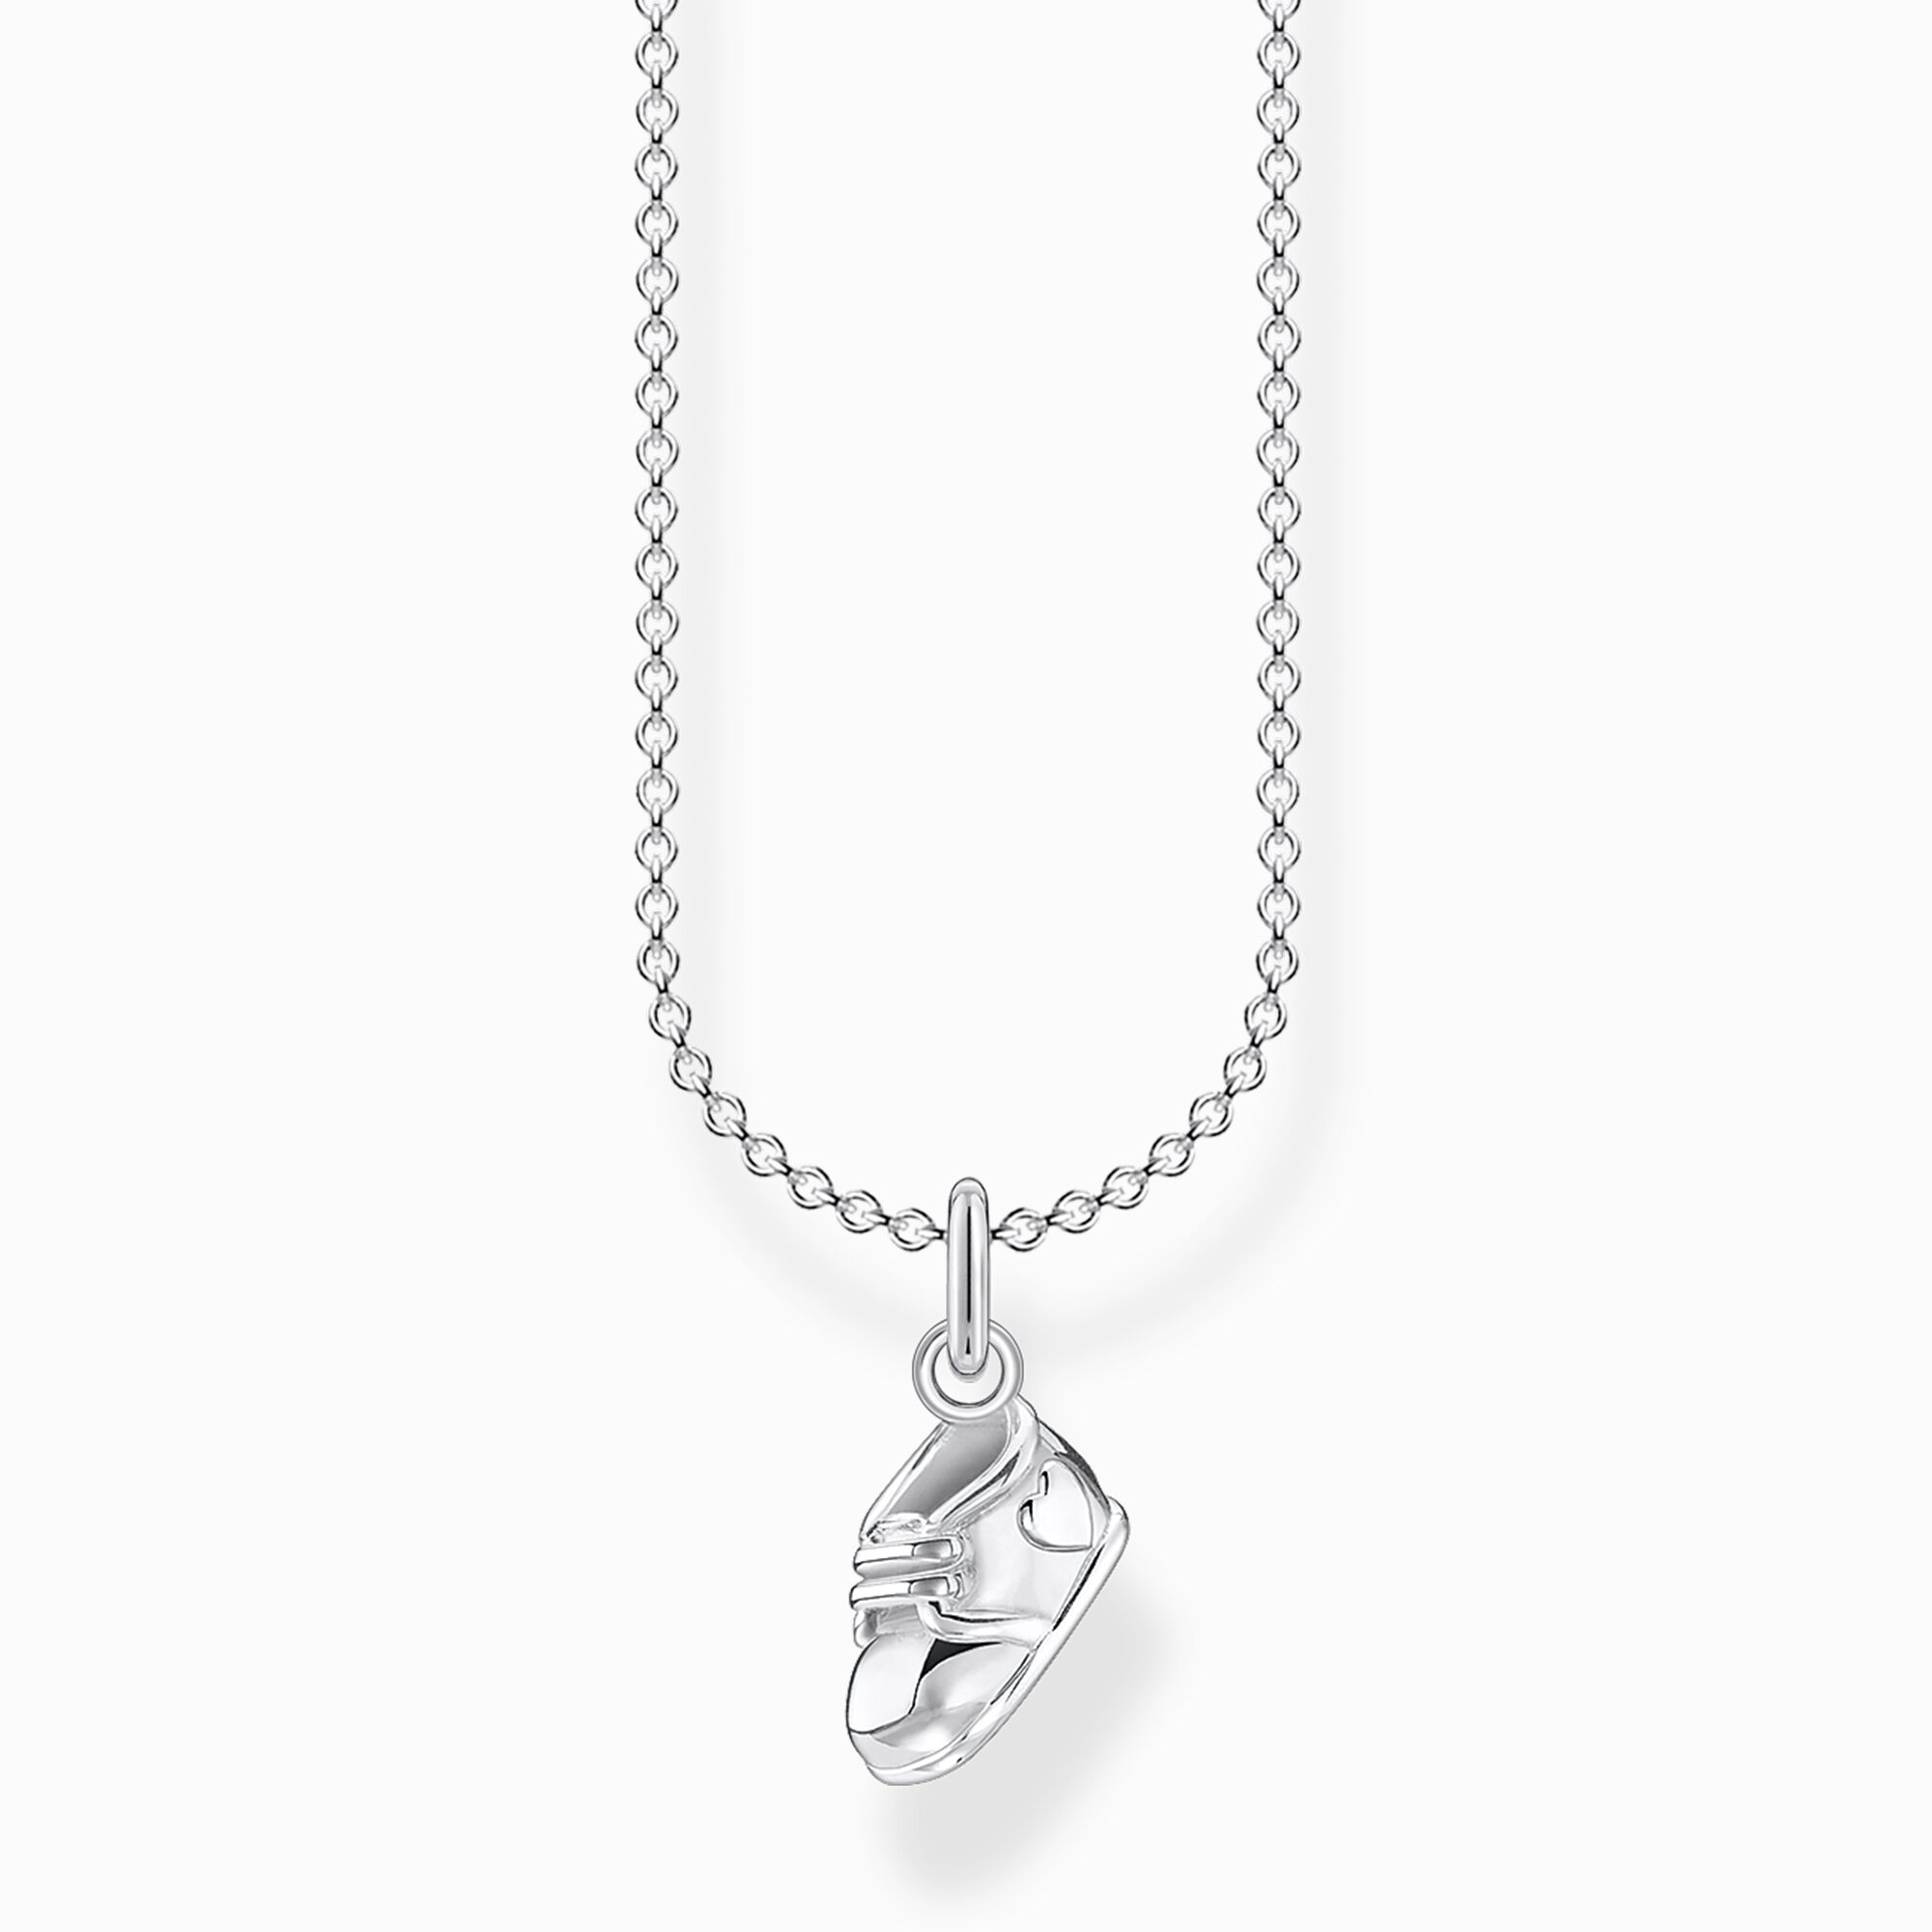 Necklace baby shoe from the Charming Collection collection in the THOMAS SABO online store